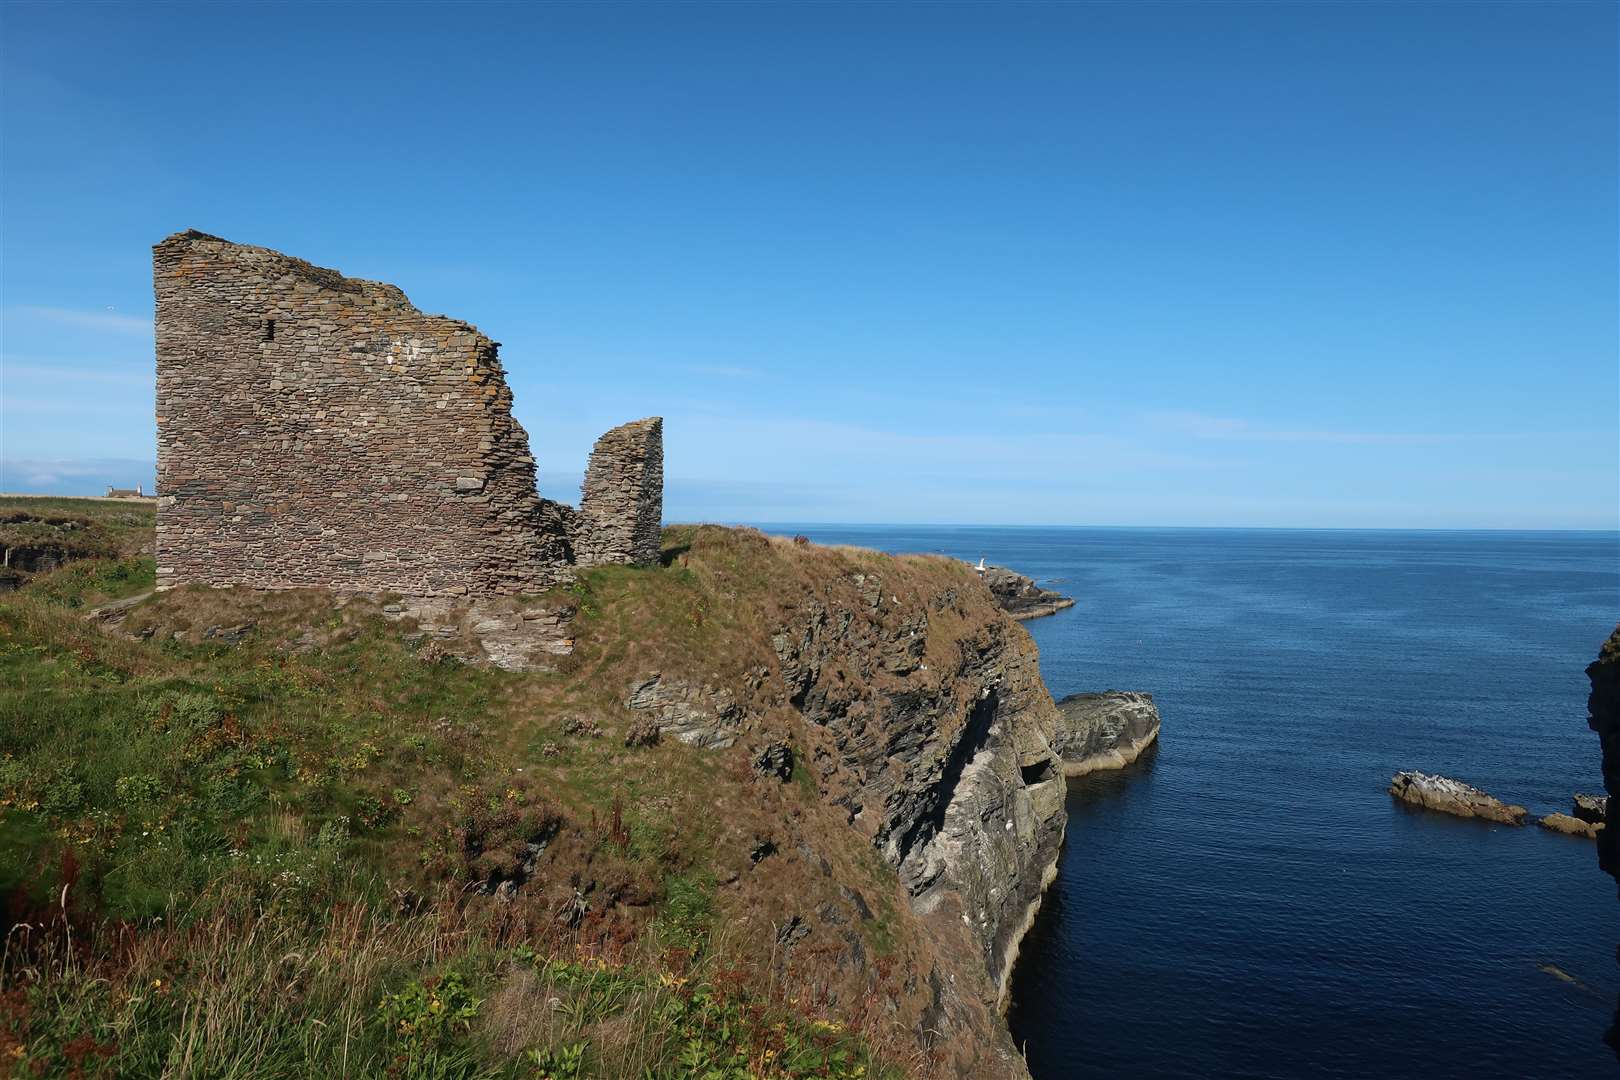 The Castle of Old Wick stands on a narrow promontory jutting out into the Moray Firth.